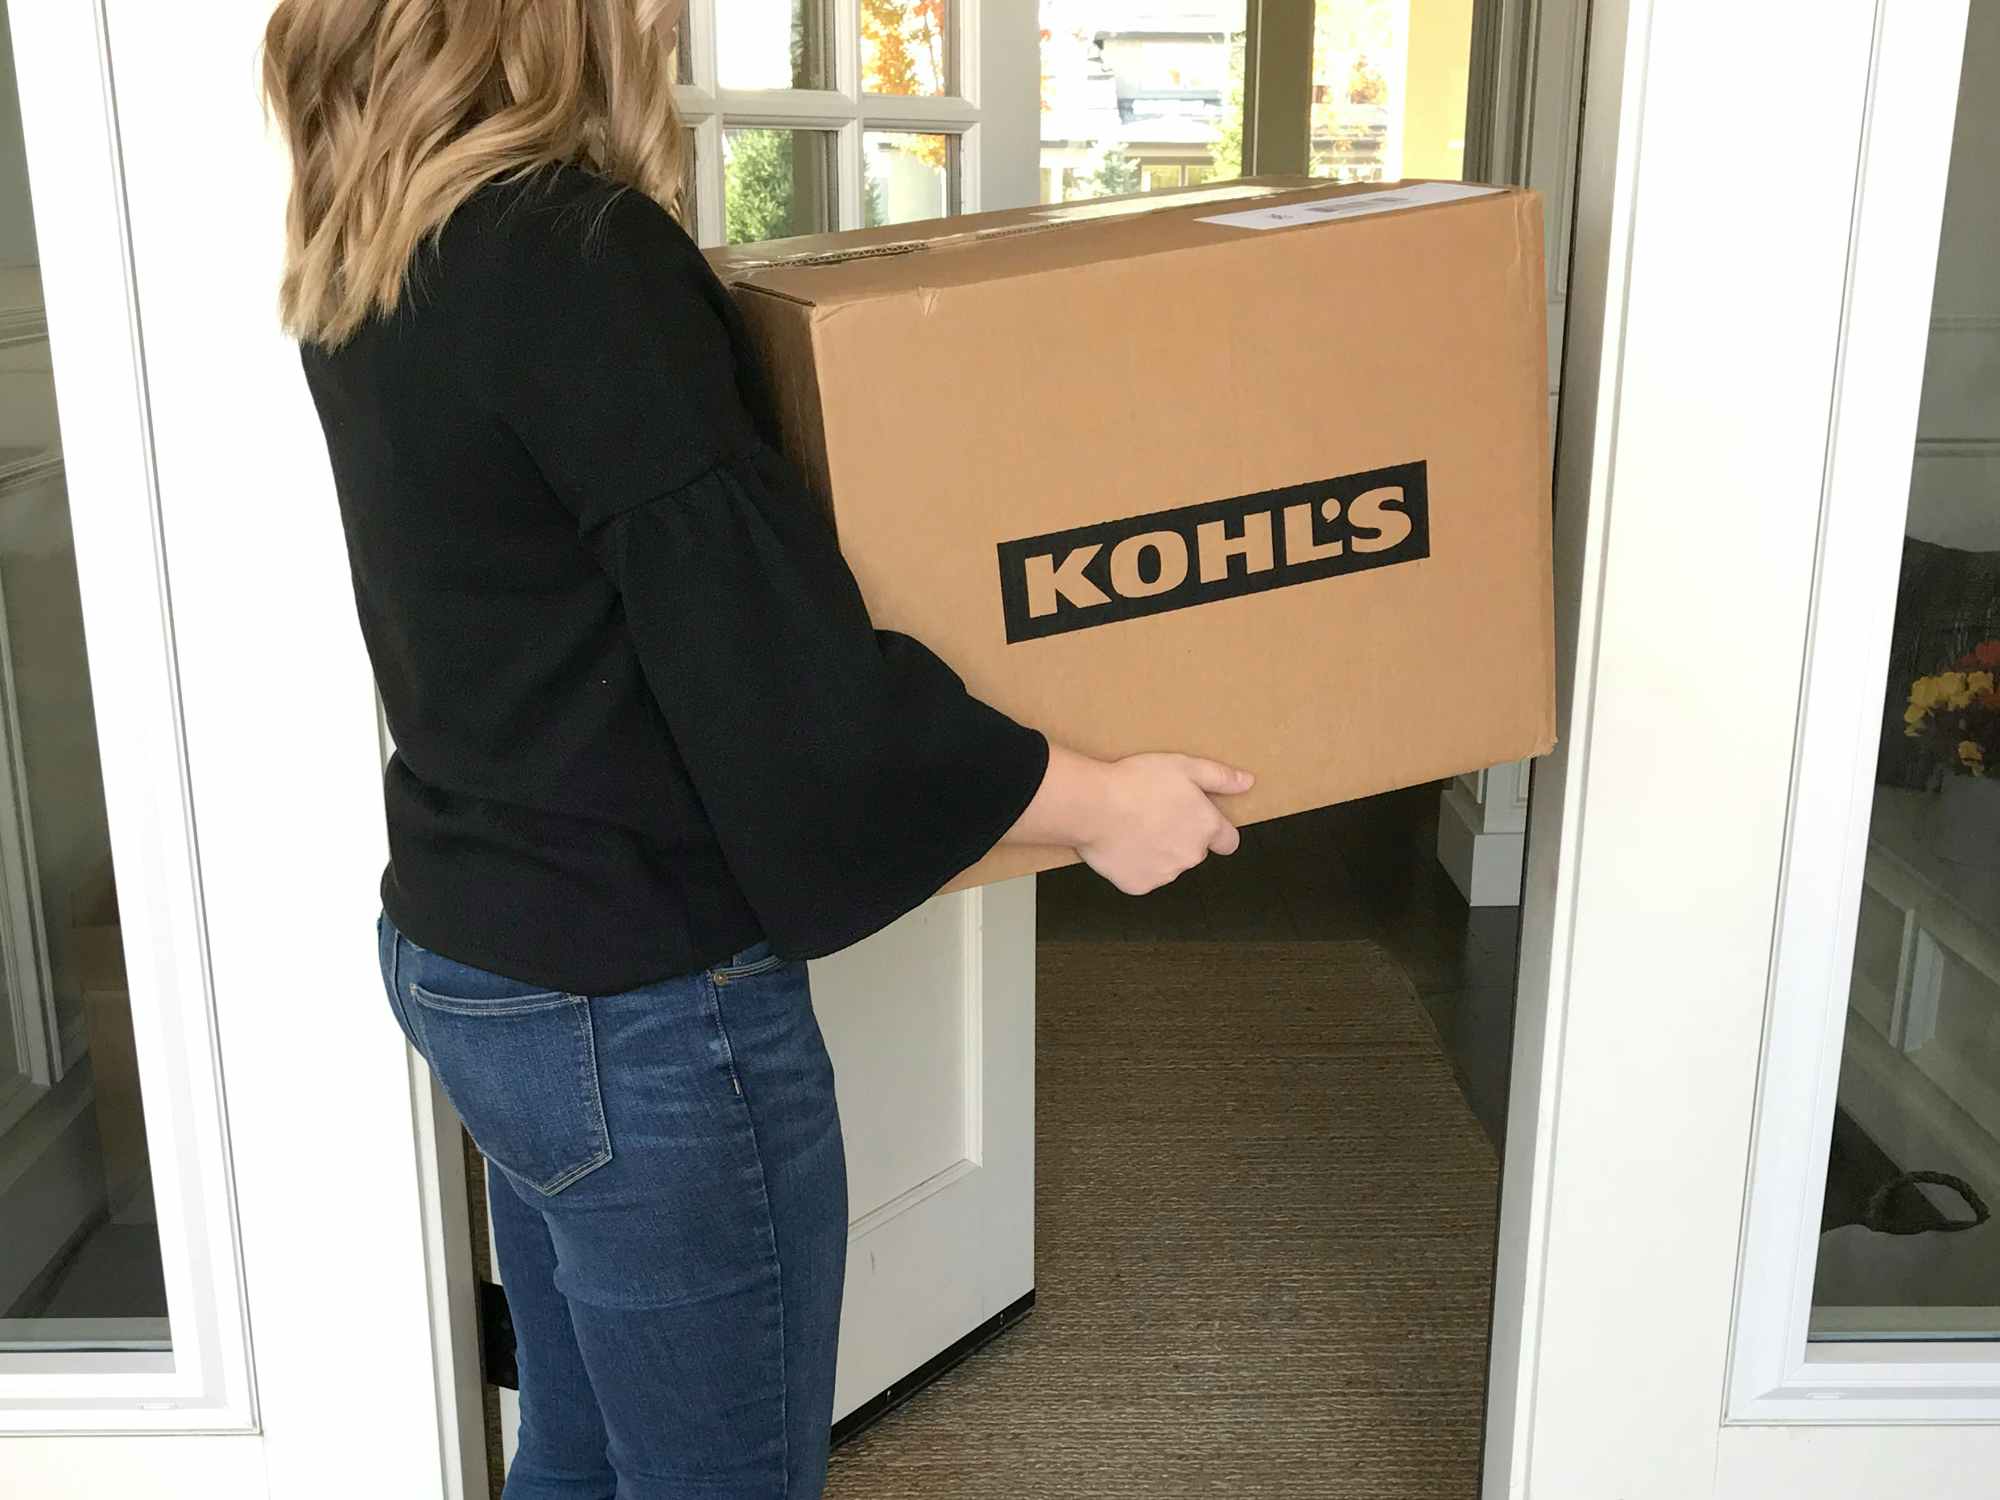 Kohl's Buy One, Get One for $1 Sale + FREE Shipping (Plus, Earn Kohl's  Cash!)